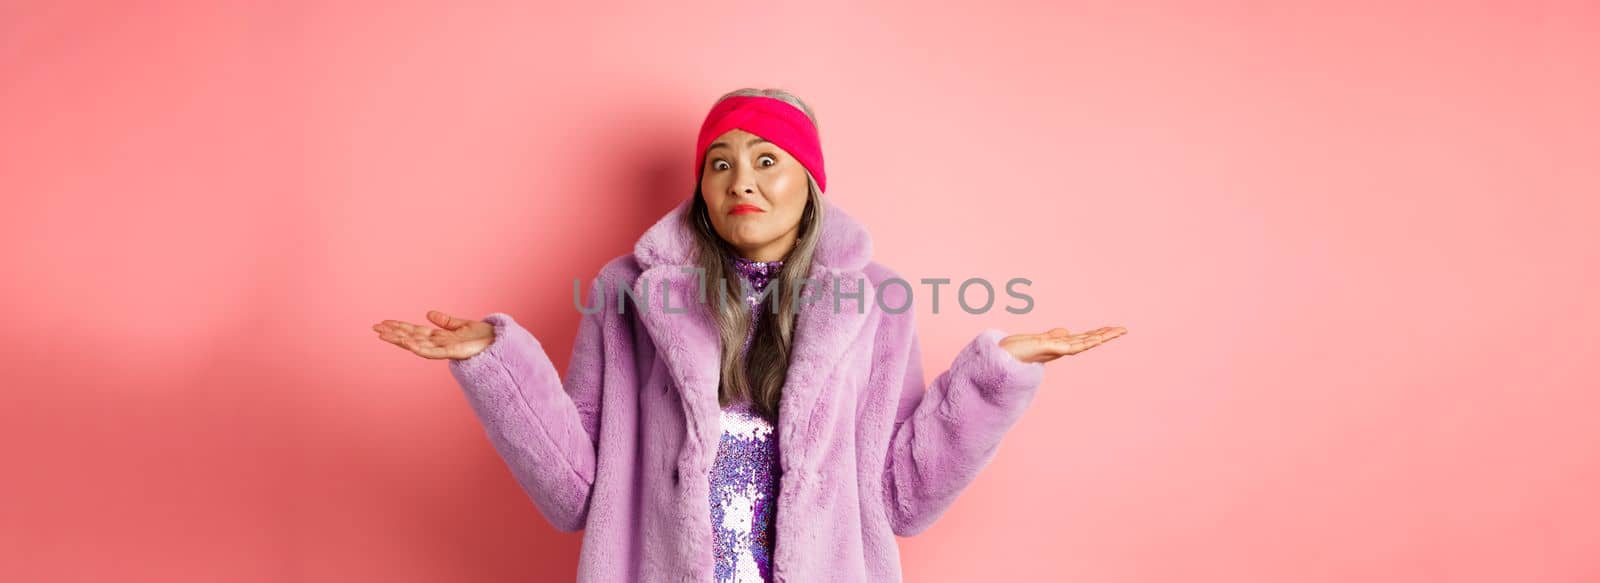 Fashionable and funky asian old woman shrugging shoulders, looking confused and clueless, standing in stylish purple coat and headband, pink background.